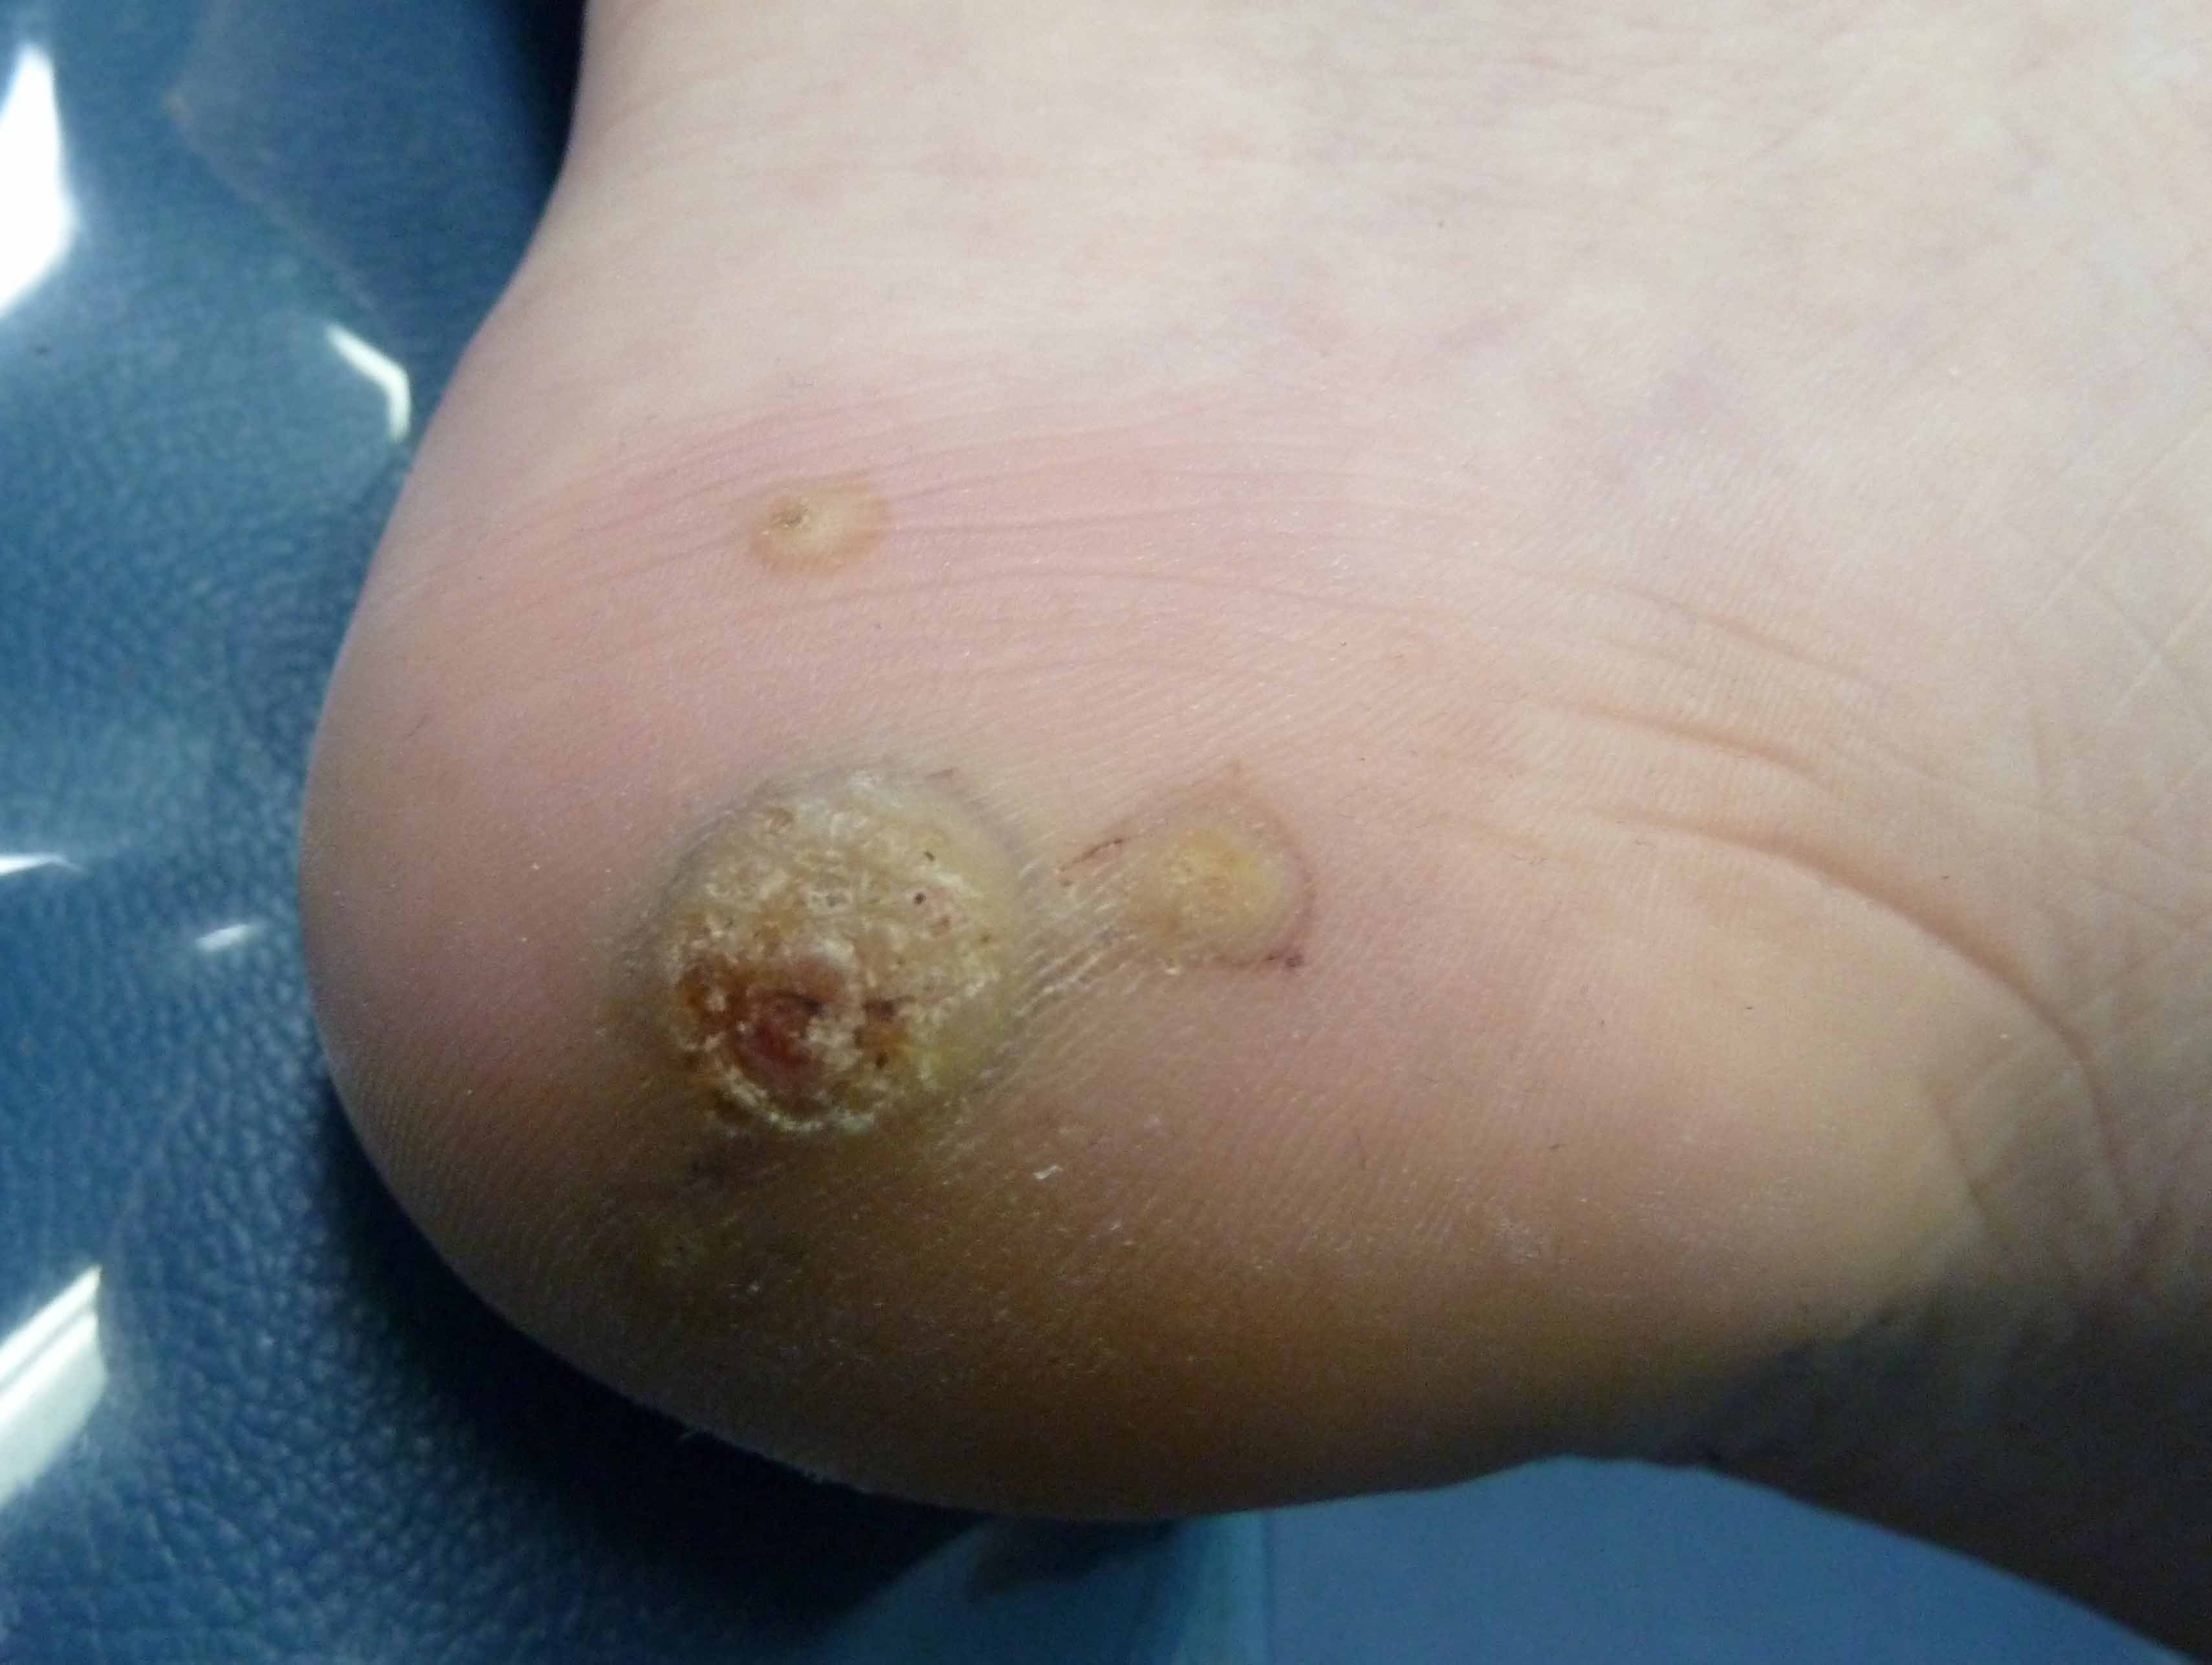 Picture of Viral Skin Diseases and Problems - Plantar Warts